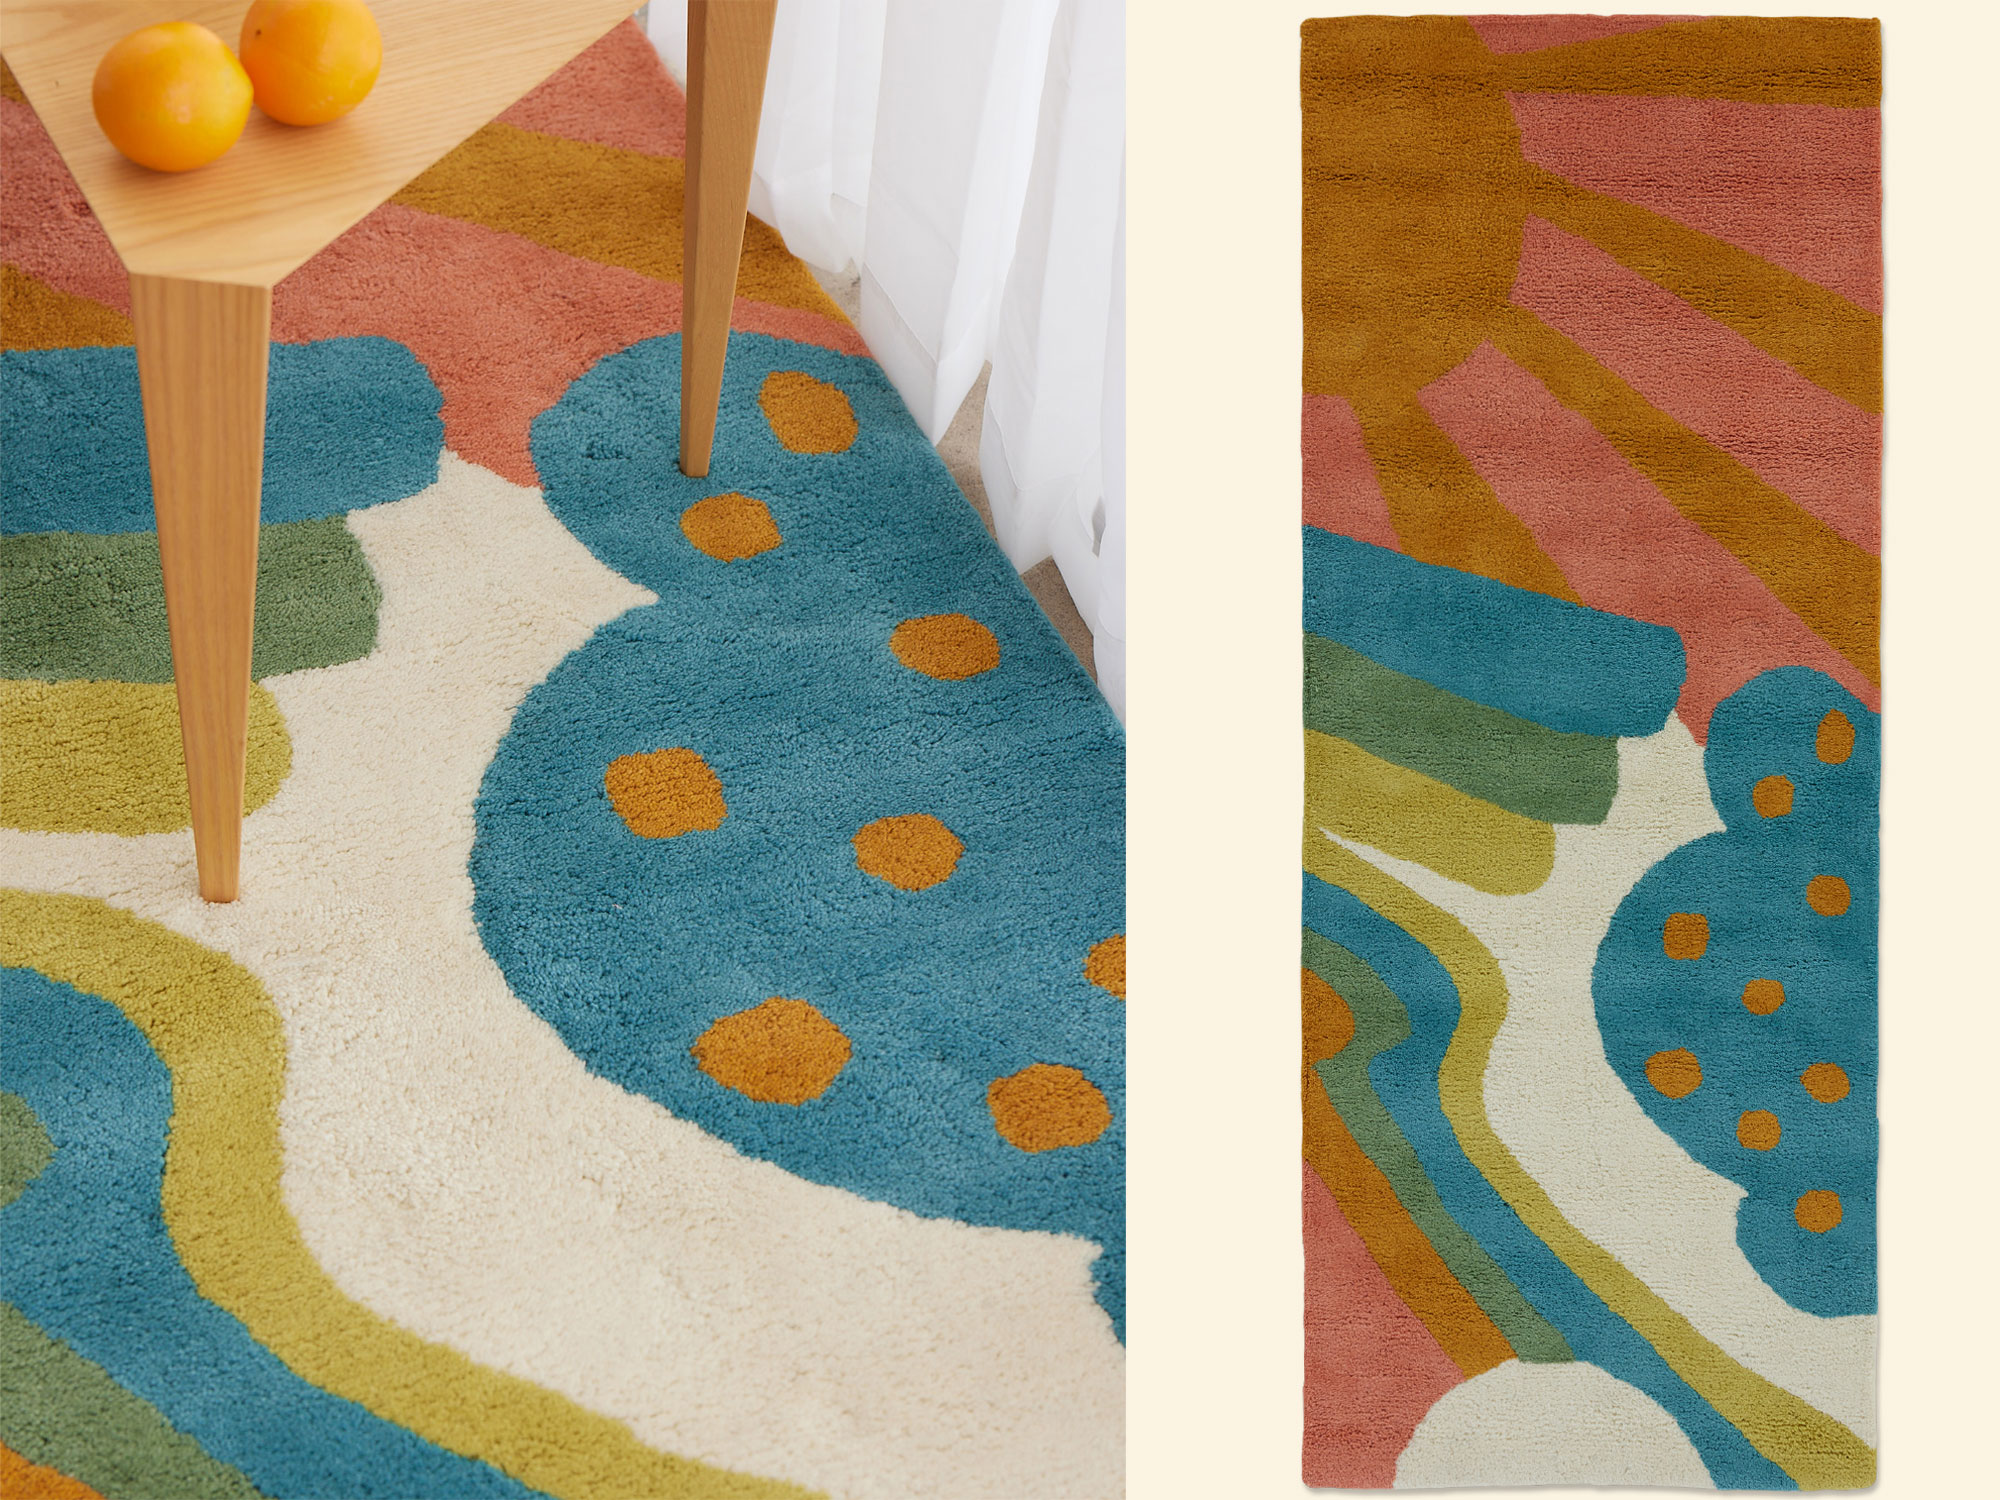 A very bold and colorful area rug by Angela Adams called Daytrip Happy